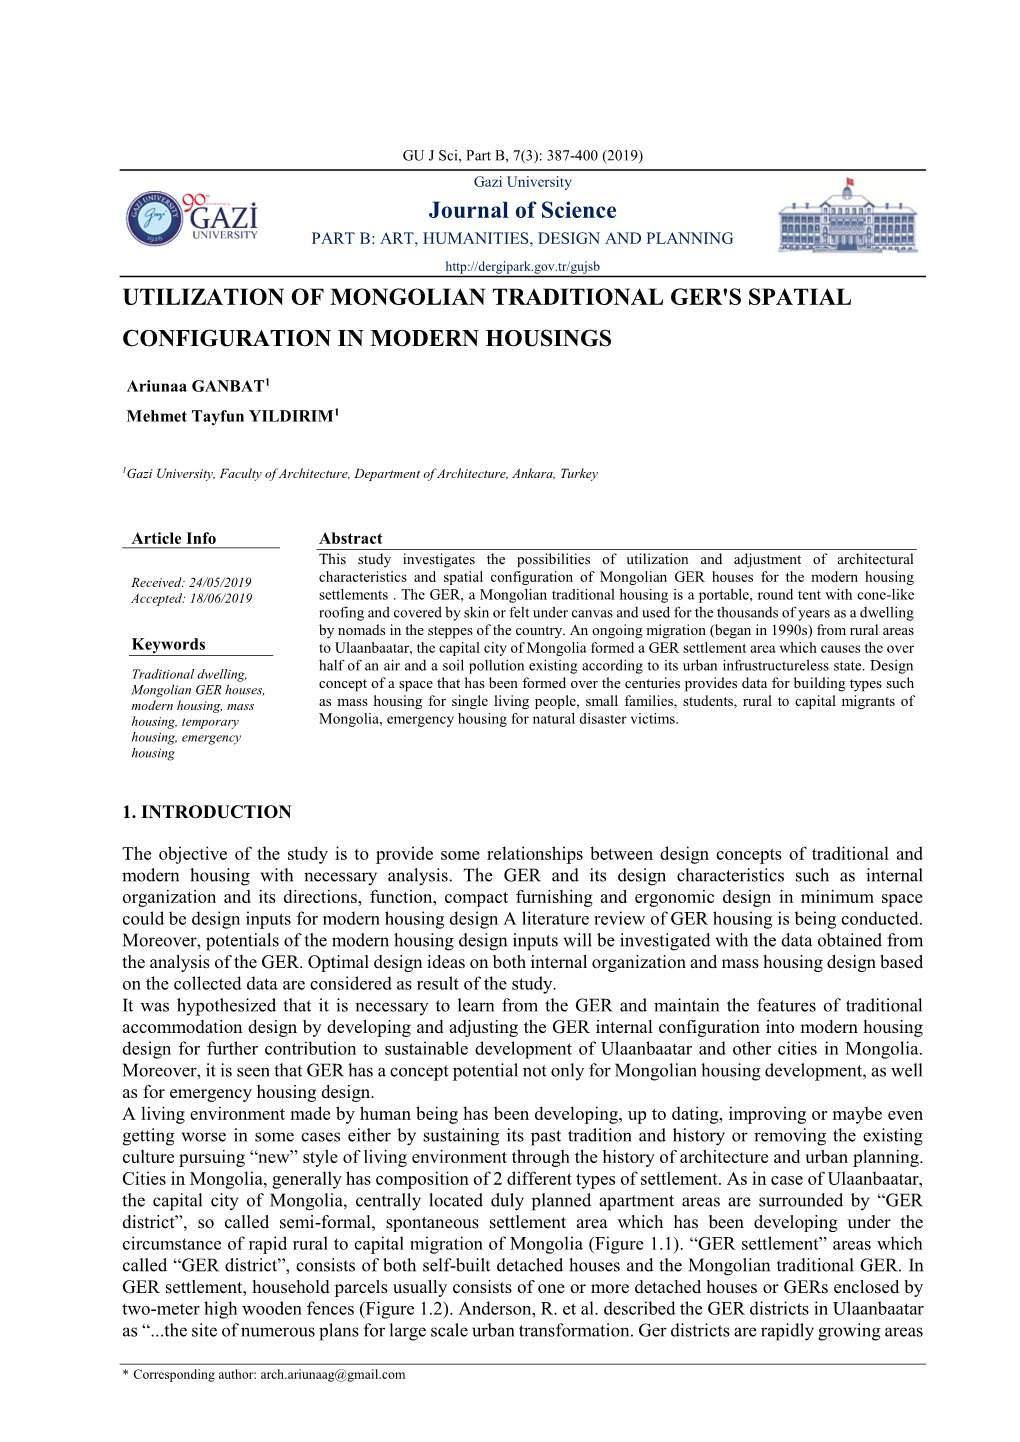 Journal of Science UTILIZATION of MONGOLIAN TRADITIONAL GER's SPATIAL CONFIGURATION in MODERN HOUSINGS